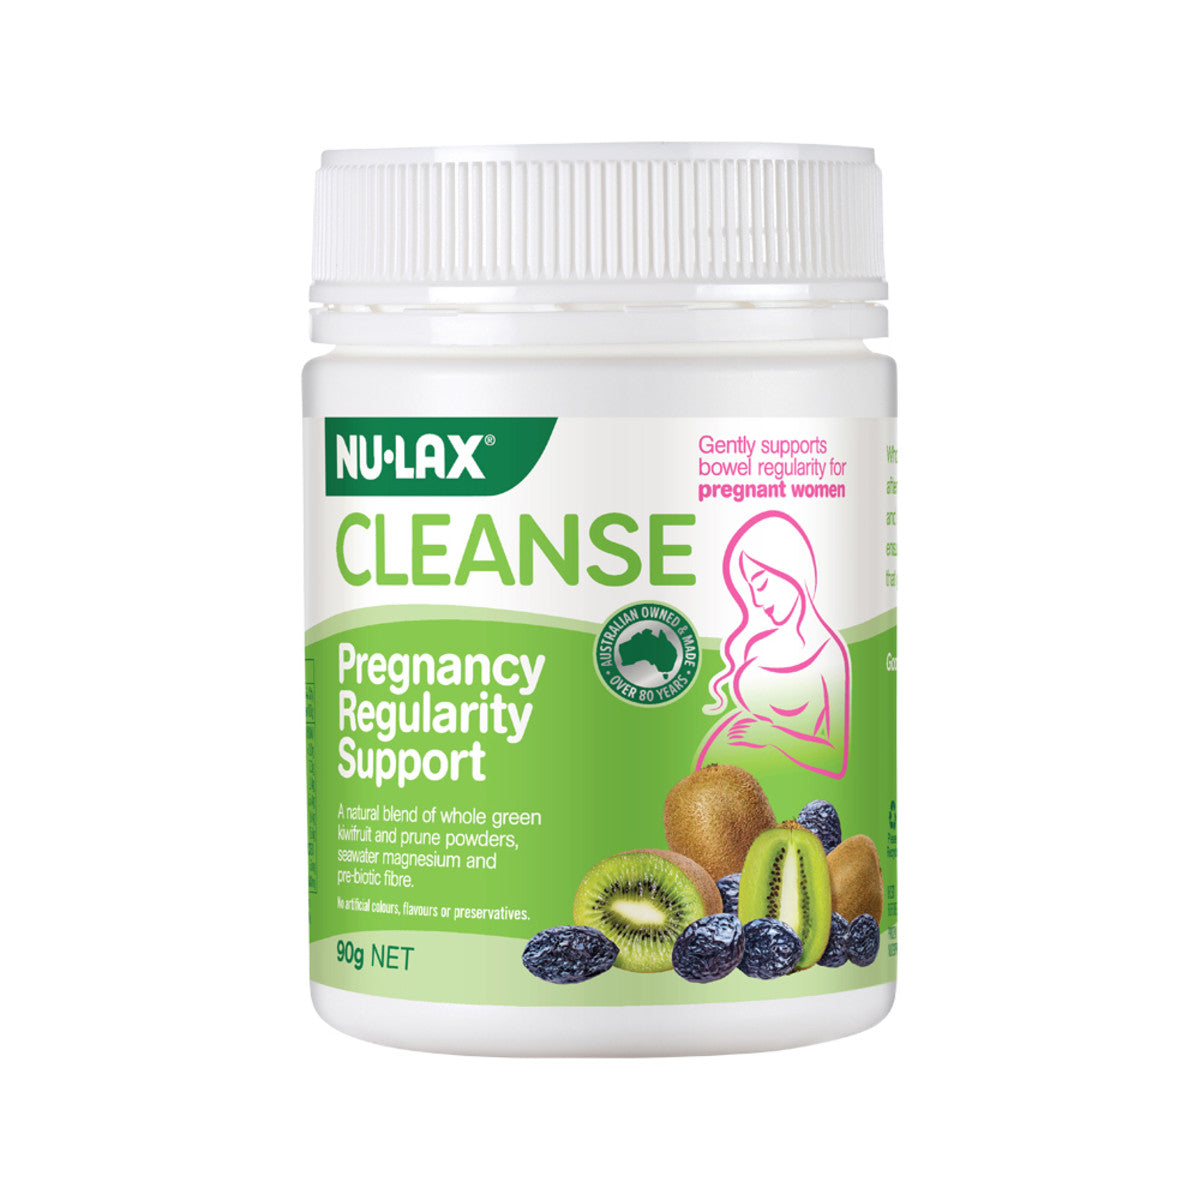 NuLax - Cleanse Pregnancy Regularity Support